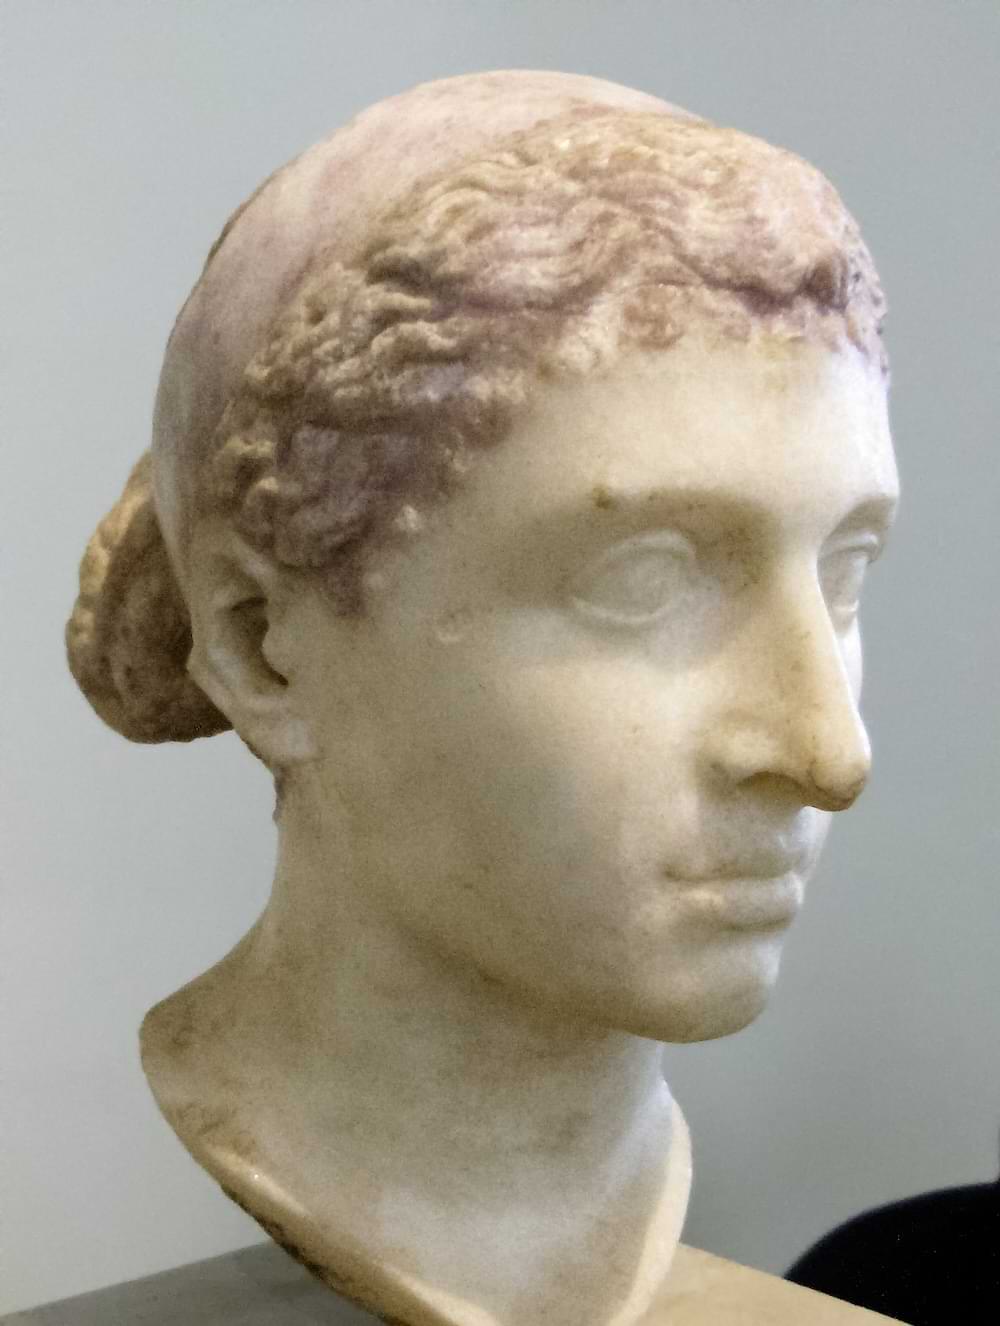 Marble bust of Cleopatra VII of Egypt, ca. 40-30 BCE